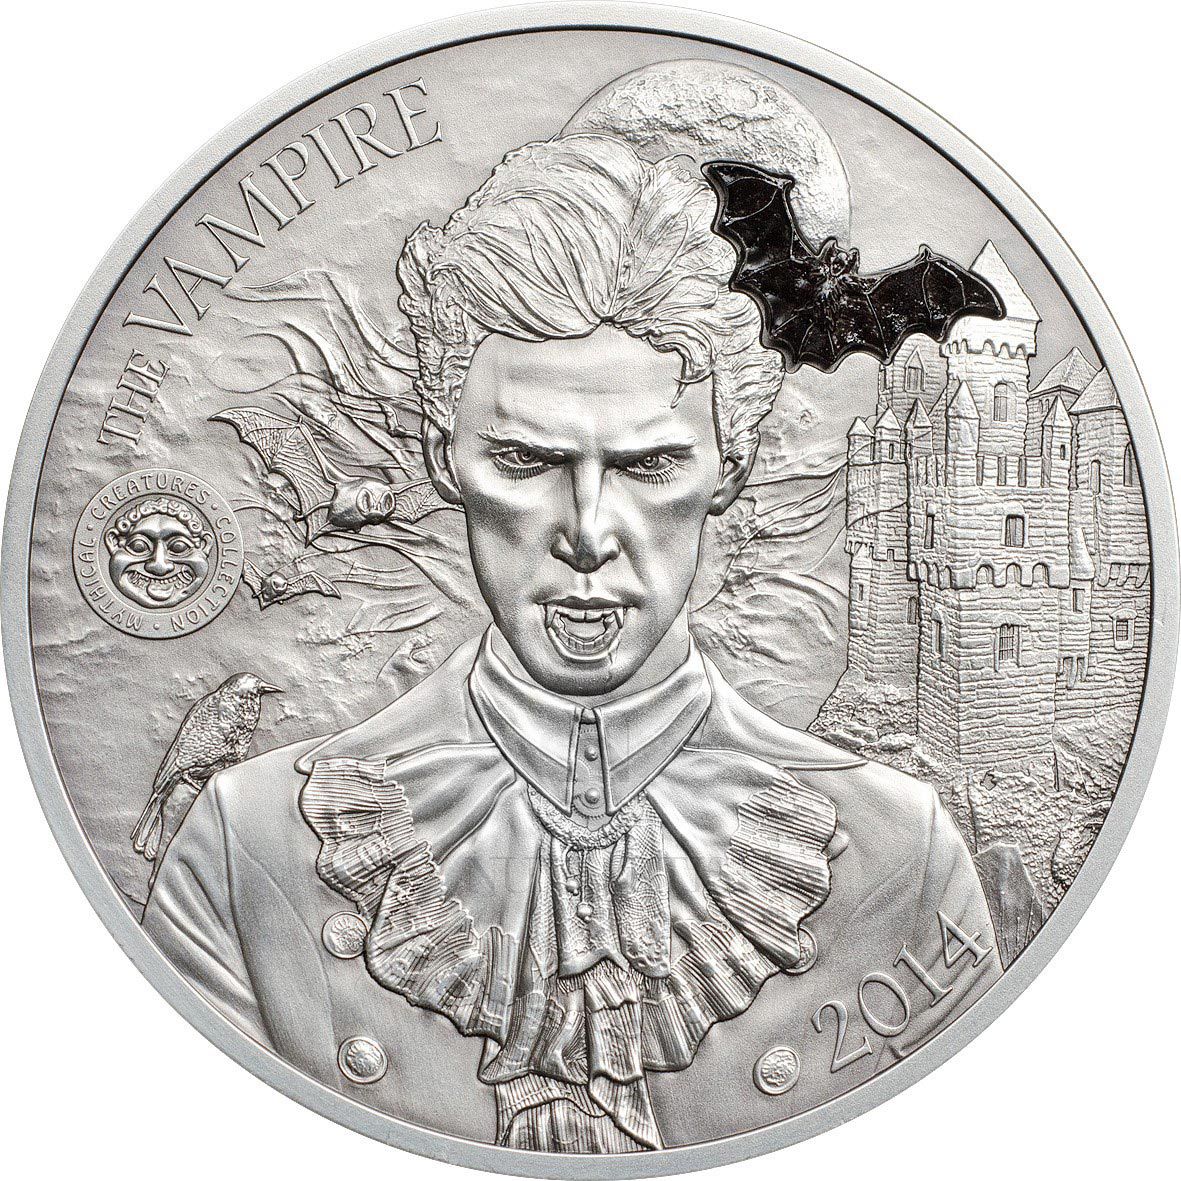 http://www.coinsplanet.ru/upload/000/u28/images/vampire-2014-mythical-creat-coin.jpg